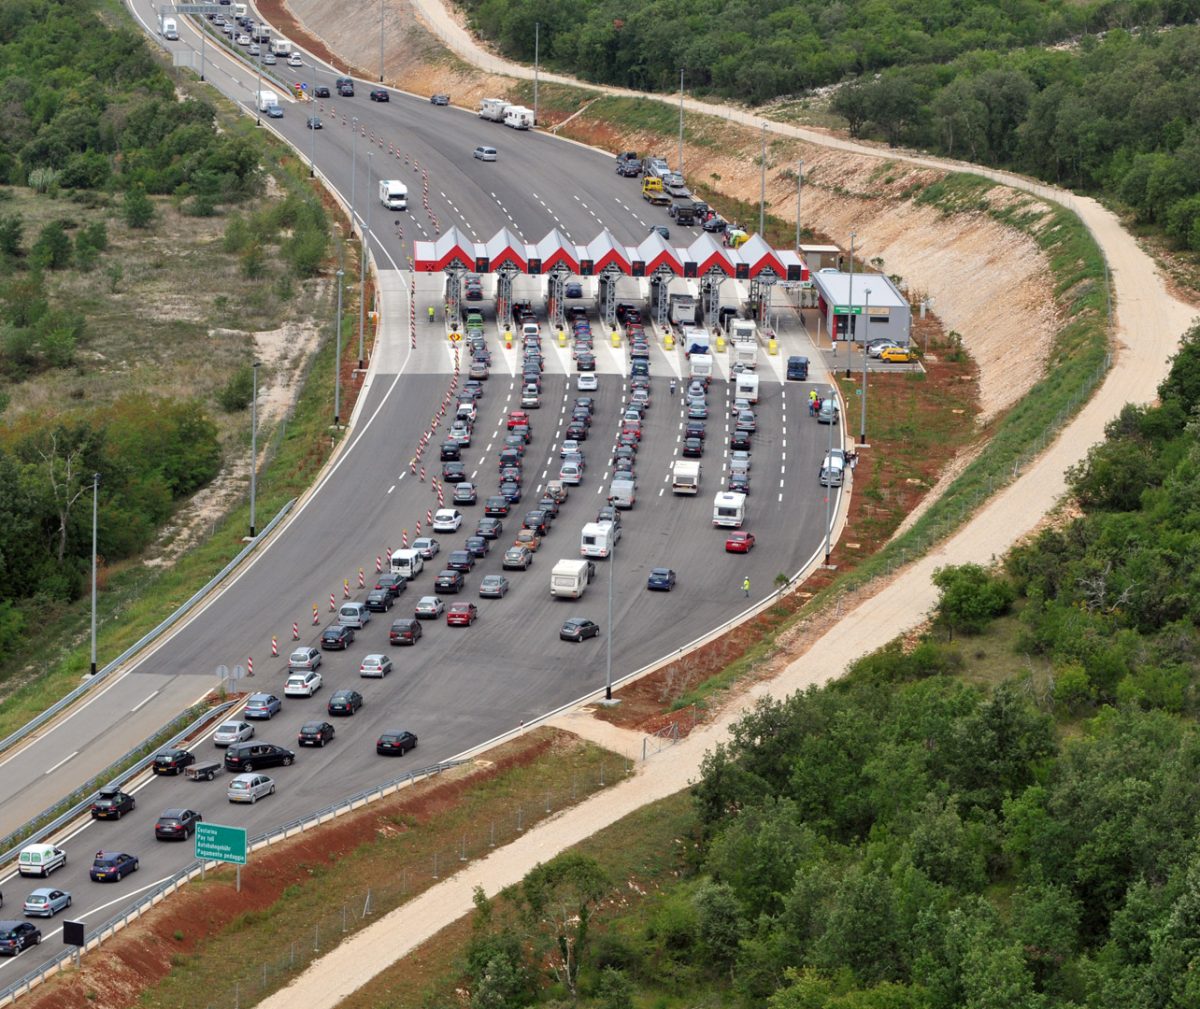 A busy highway check point seen from above during day time.